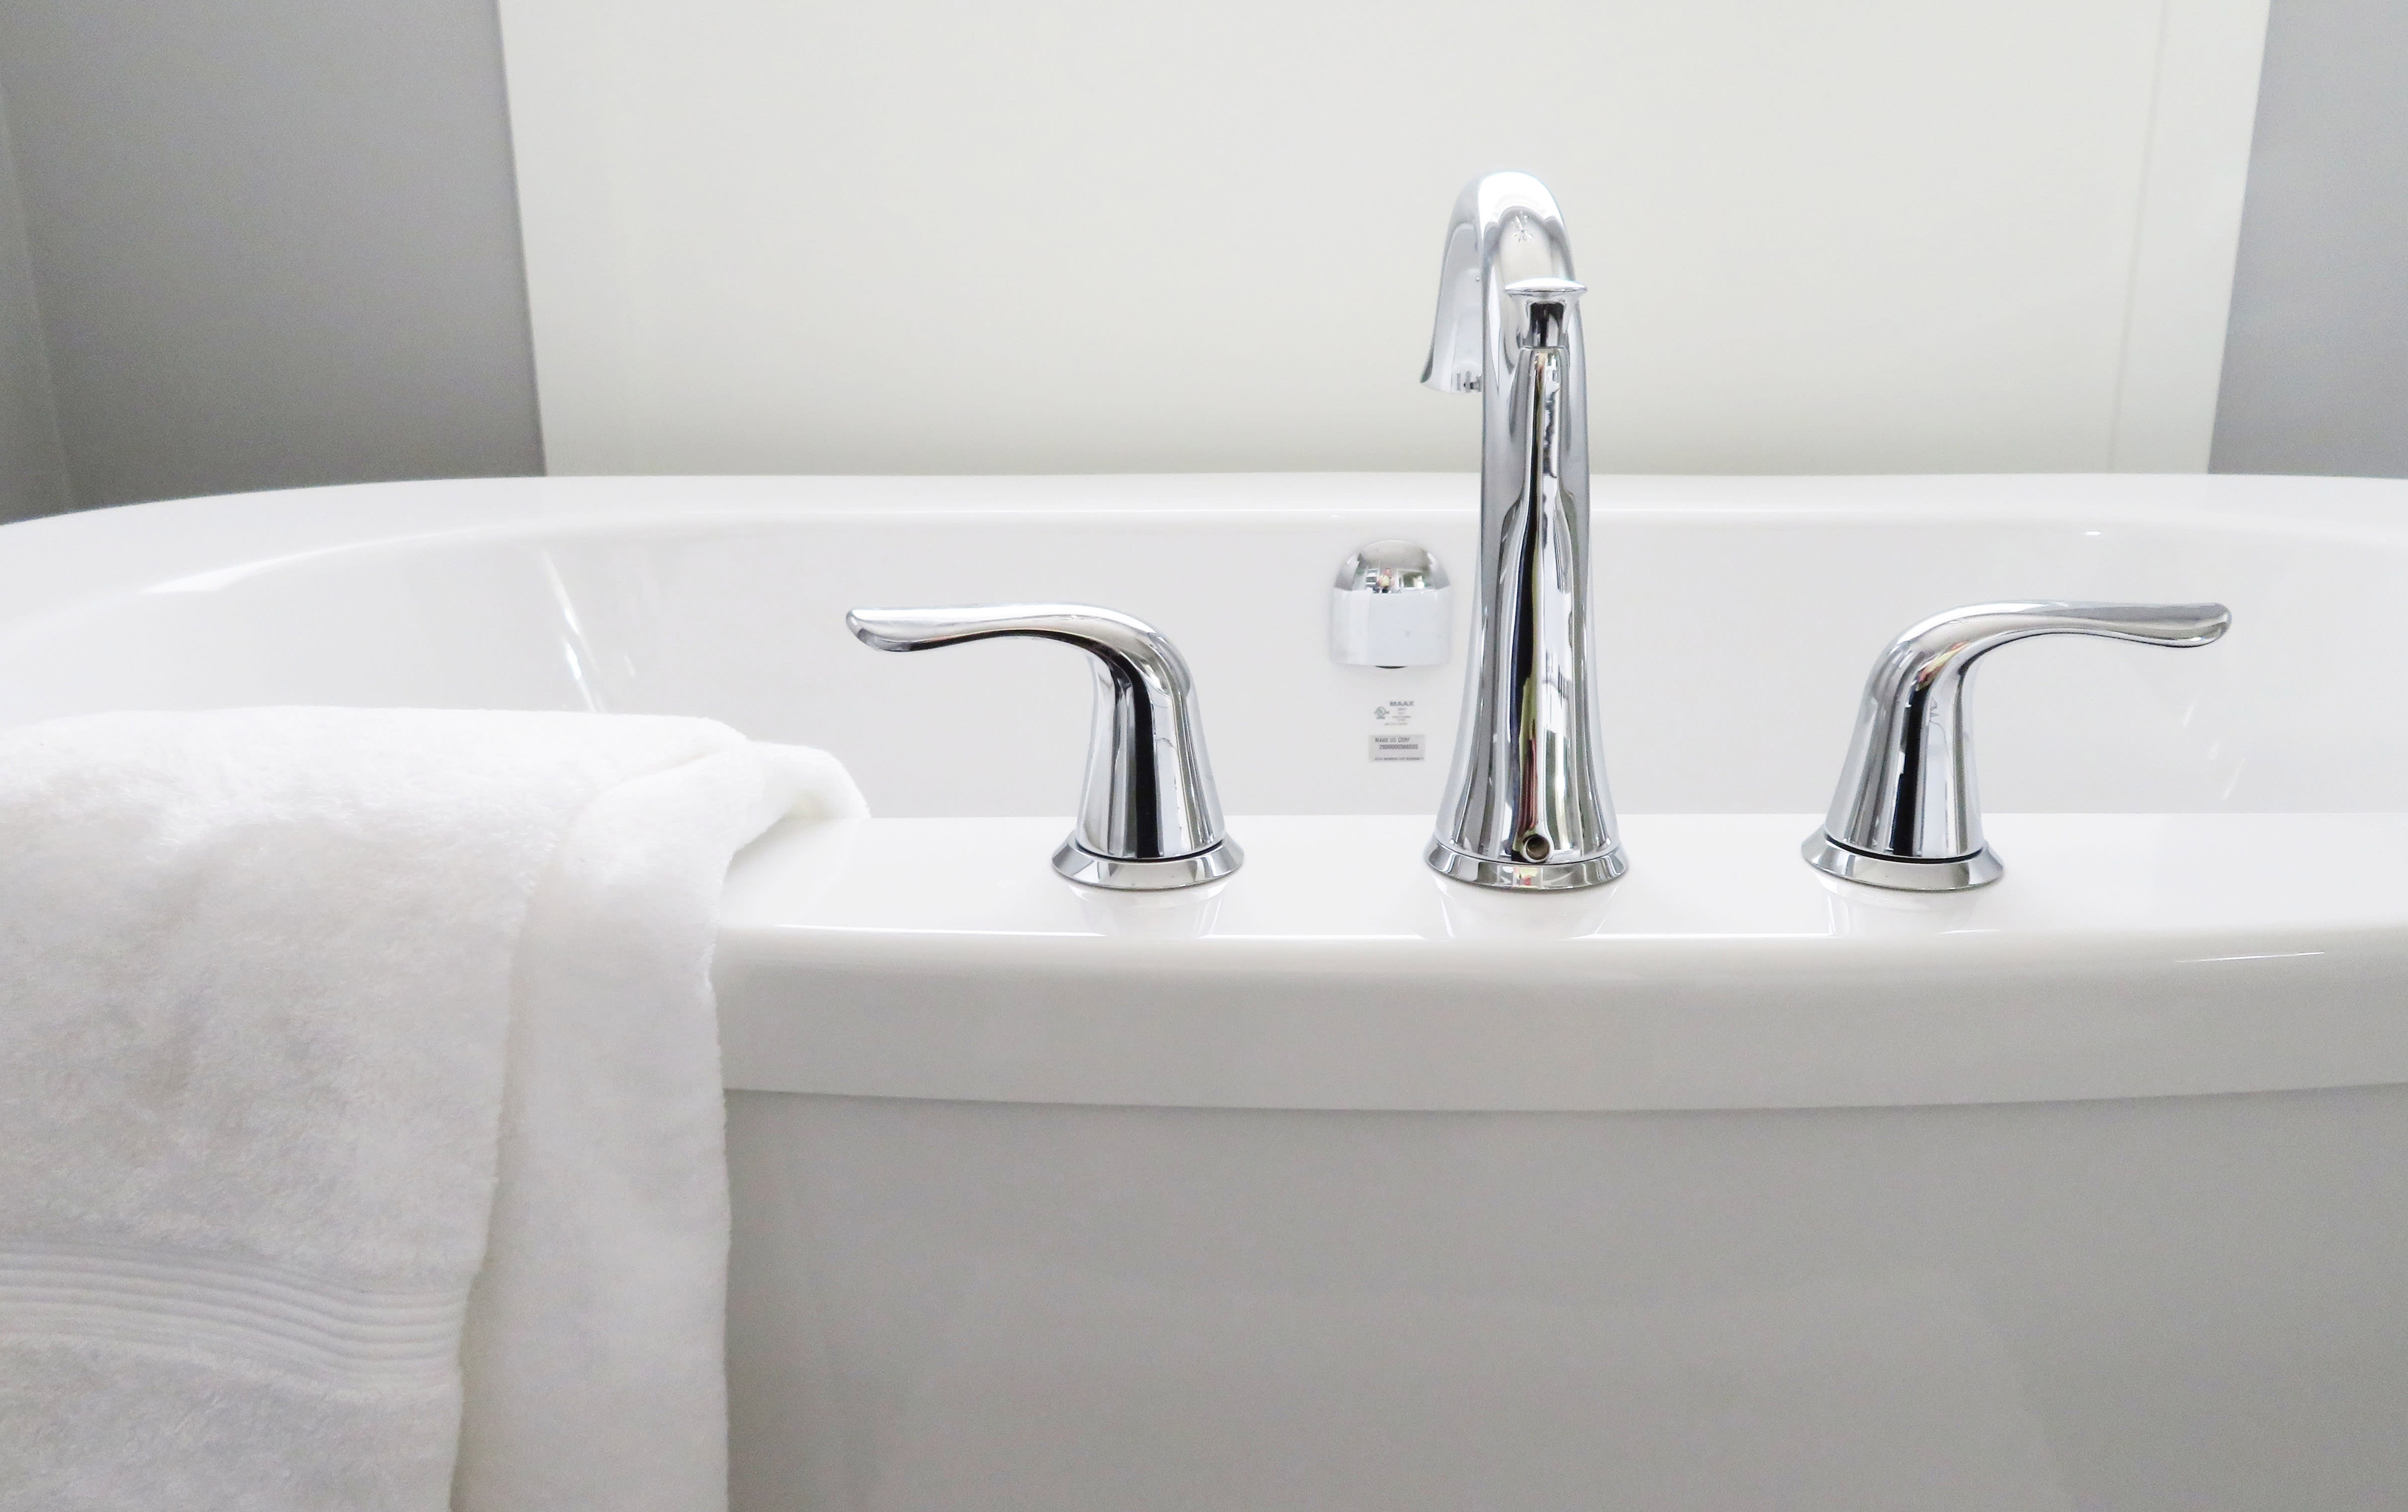 5 Ways To Clean An Old Porcelain Tub, How To Clean Old Porcelain Bathtubs